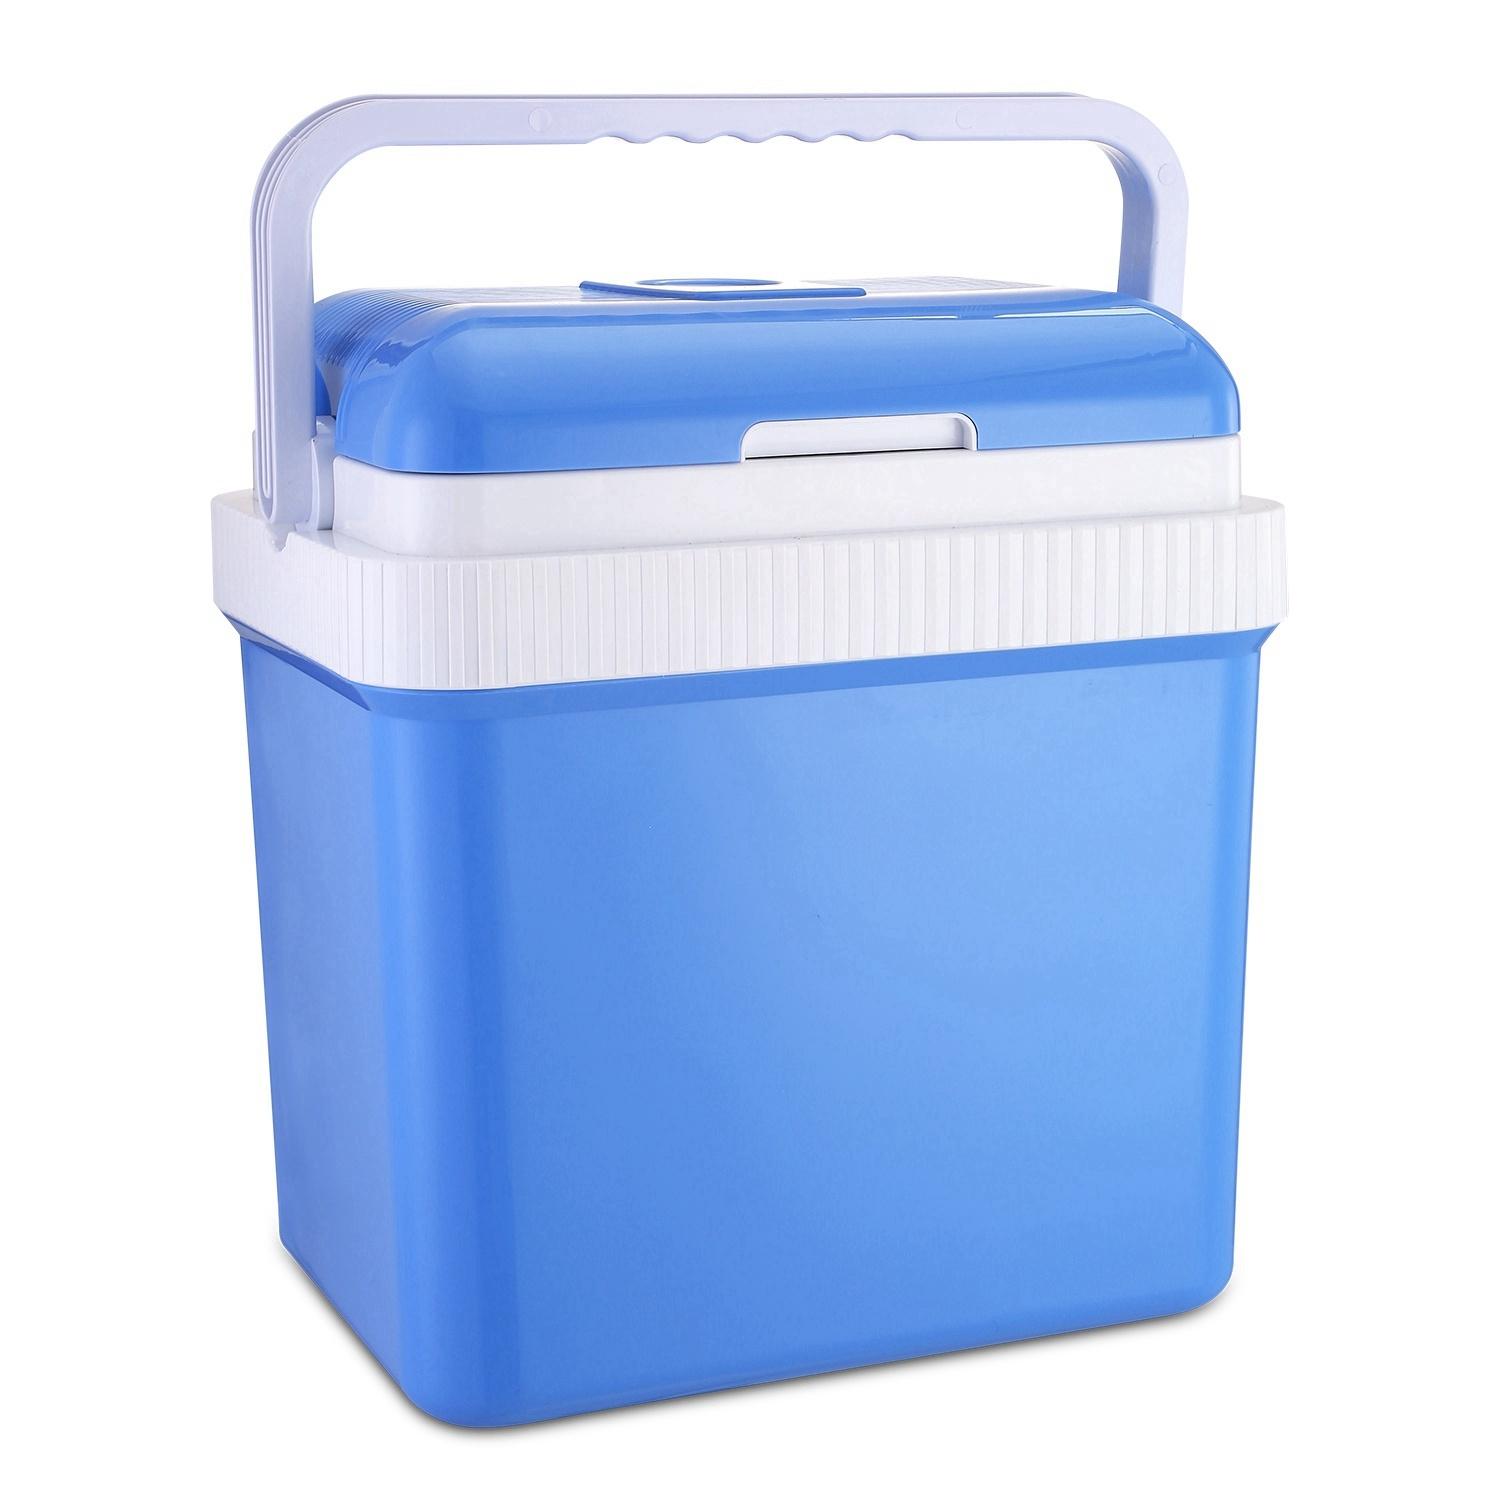 Blue portable cooler with handle